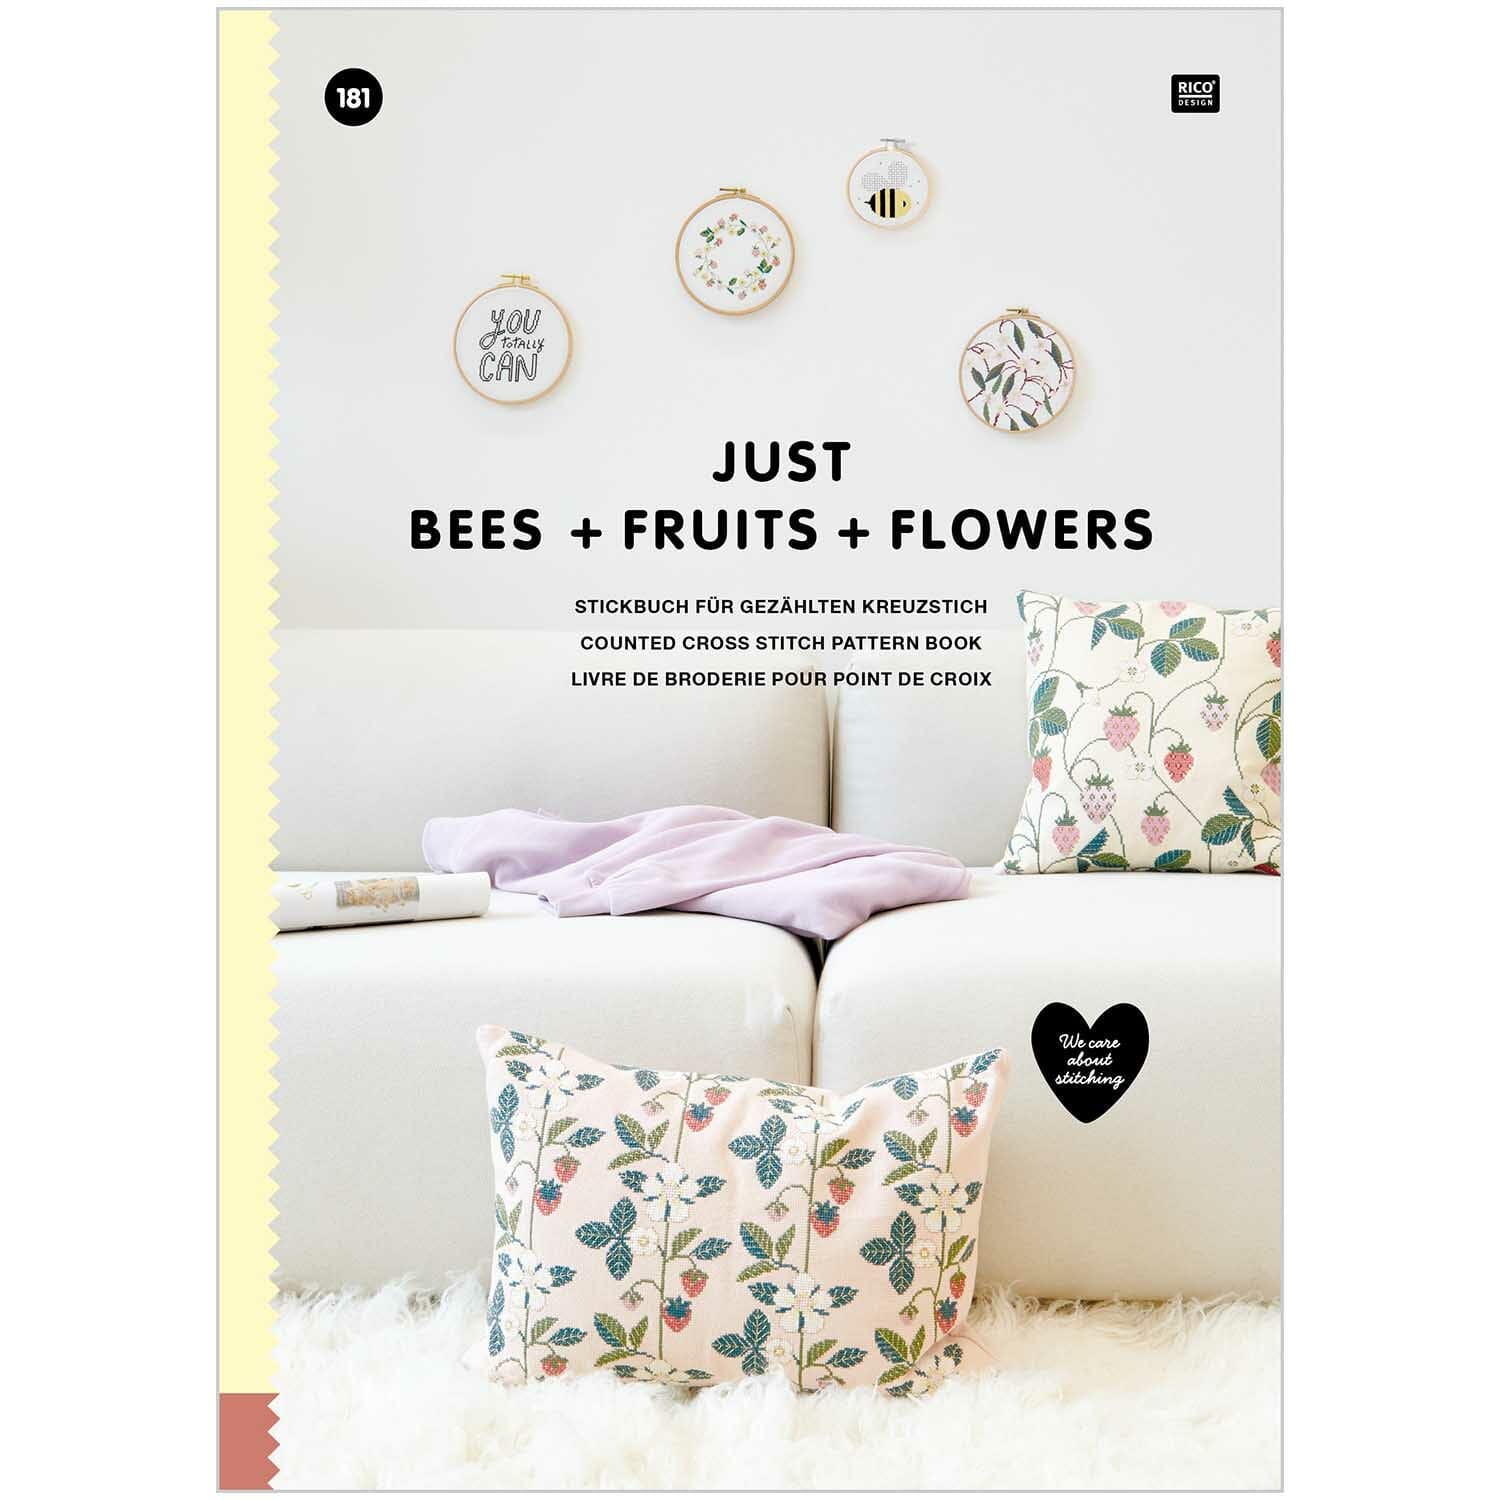 Rico  Buch181 Just Bees + Fruits+ Flowers